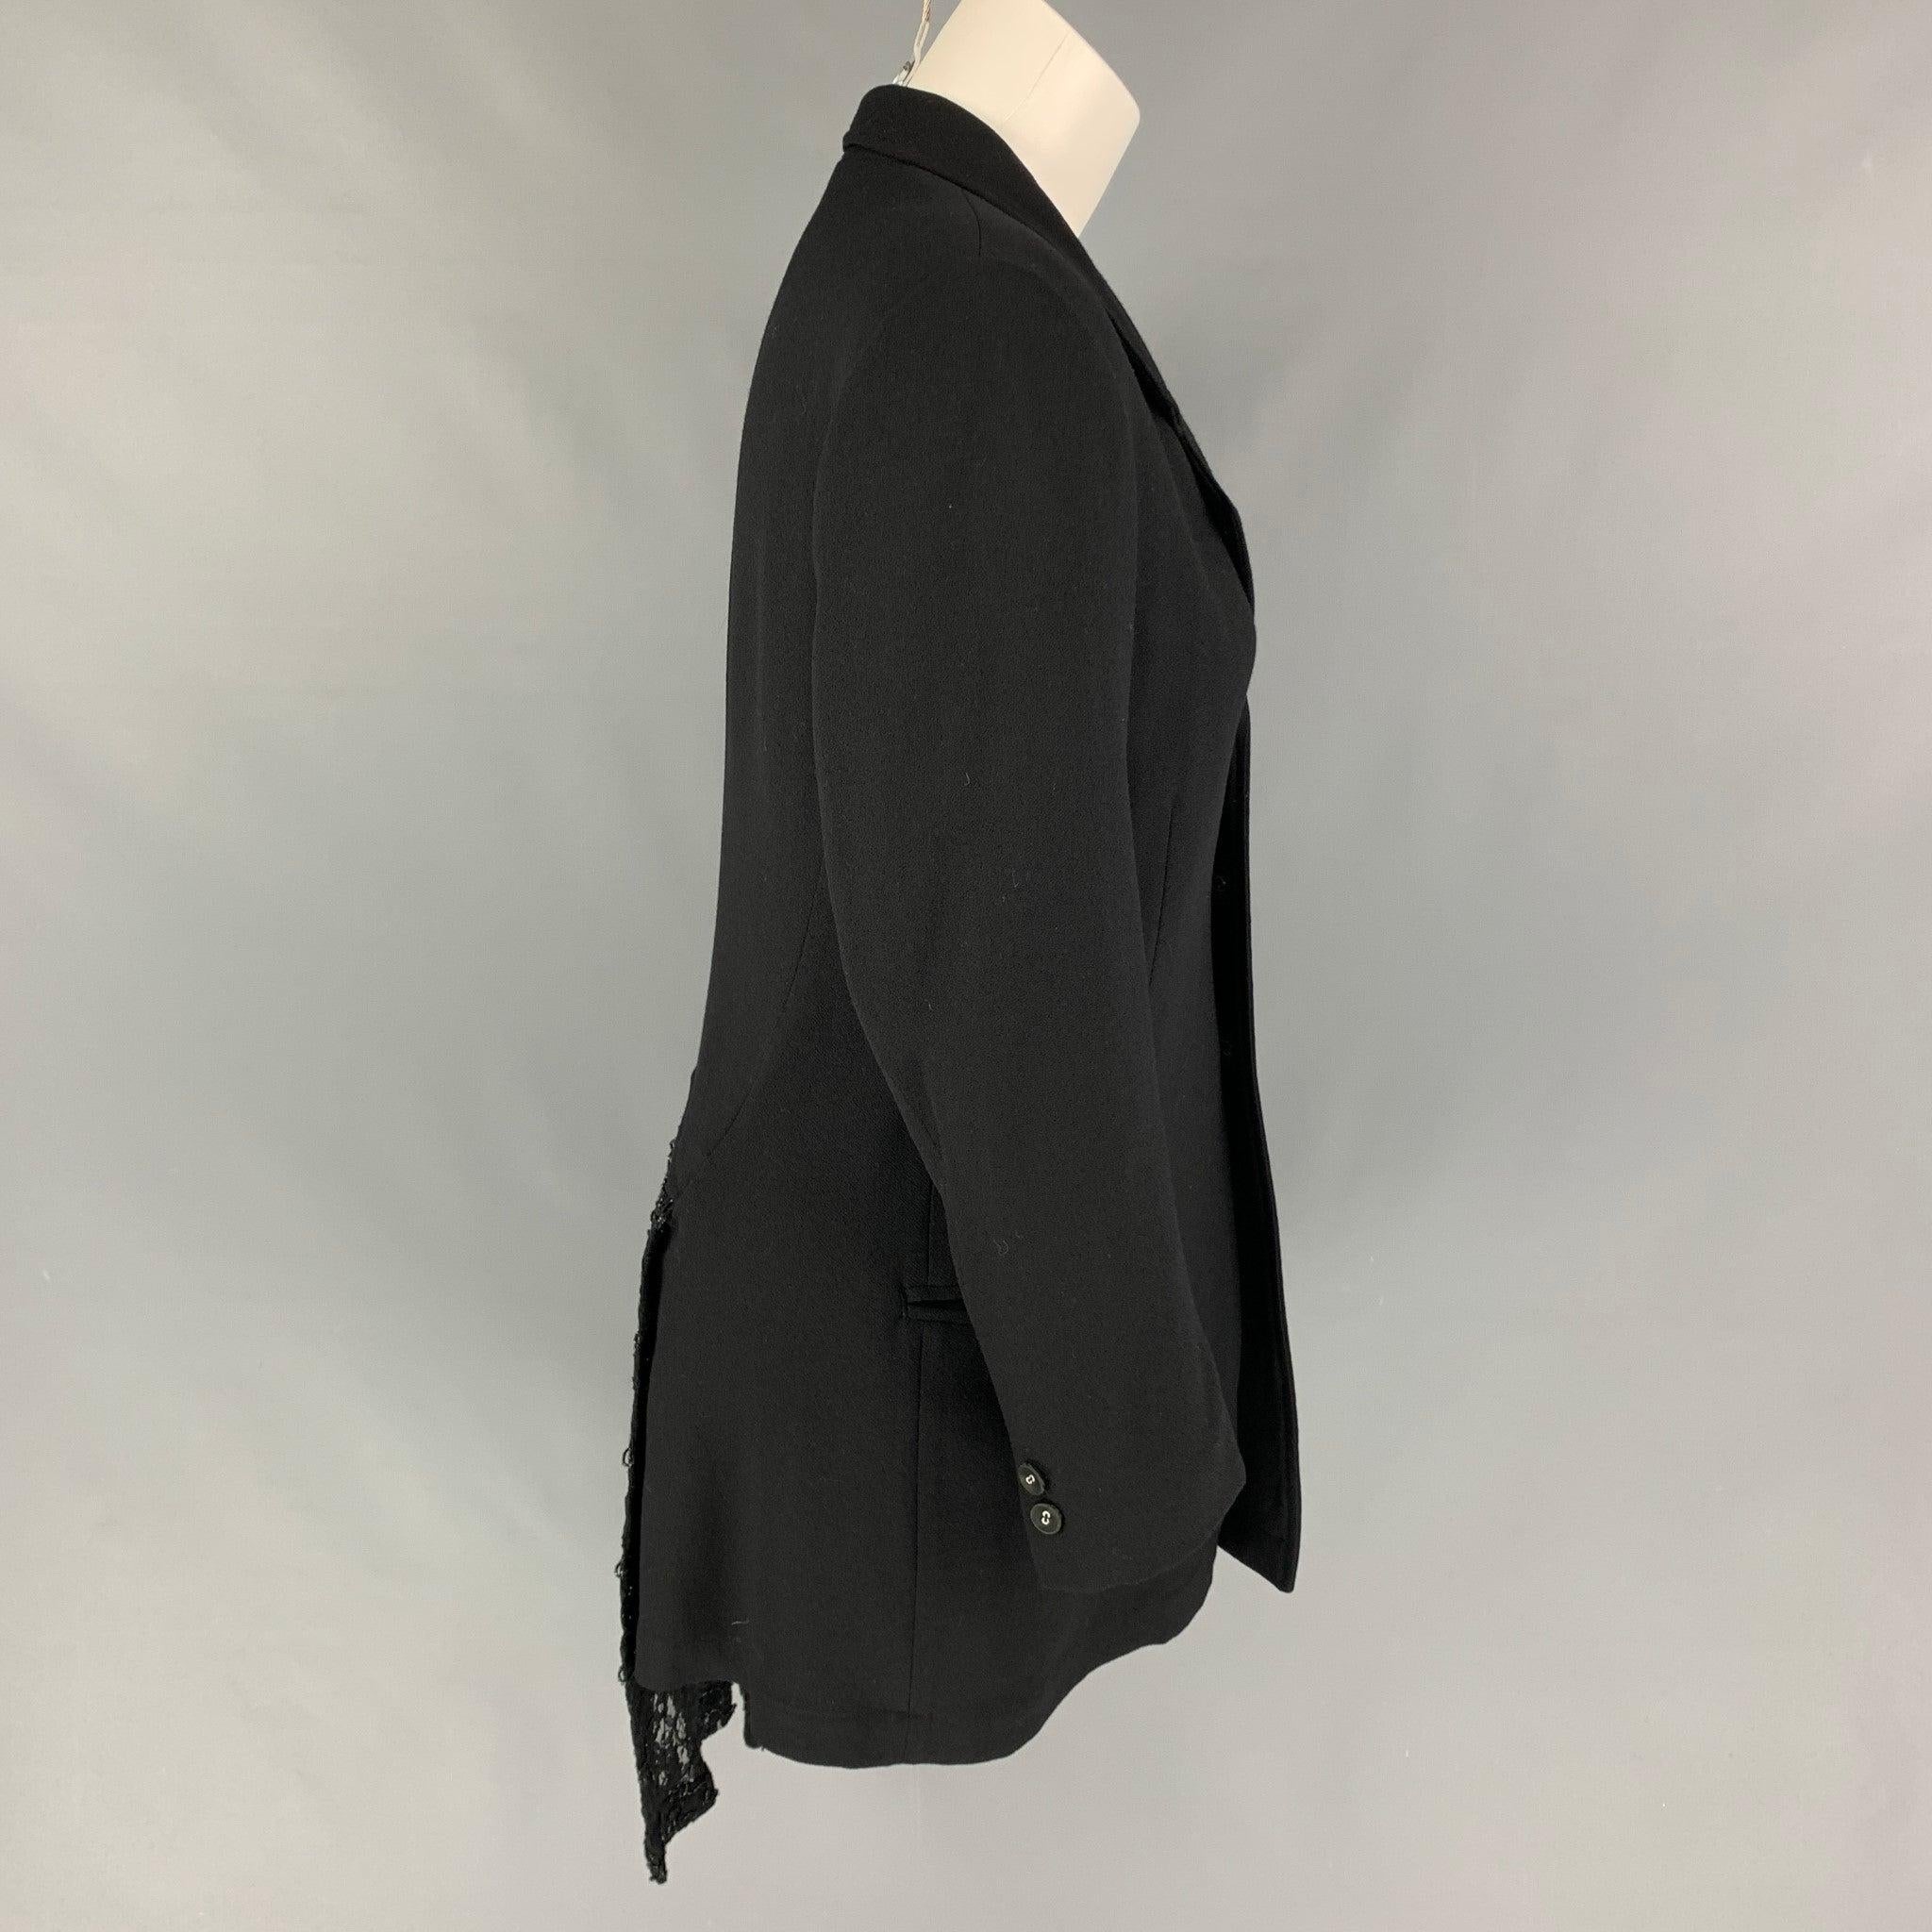 REI KAWAKUBO jacket comes in a black wool with a half liner featuring a notch lapel, ruffled lace trim, slit pocket detail, and a buttoned closure. Made in Japan.
Very Good
Pre-Owned Condition. 

Marked:   M  

Measurements: 
 
Shoulder: 16 inches 